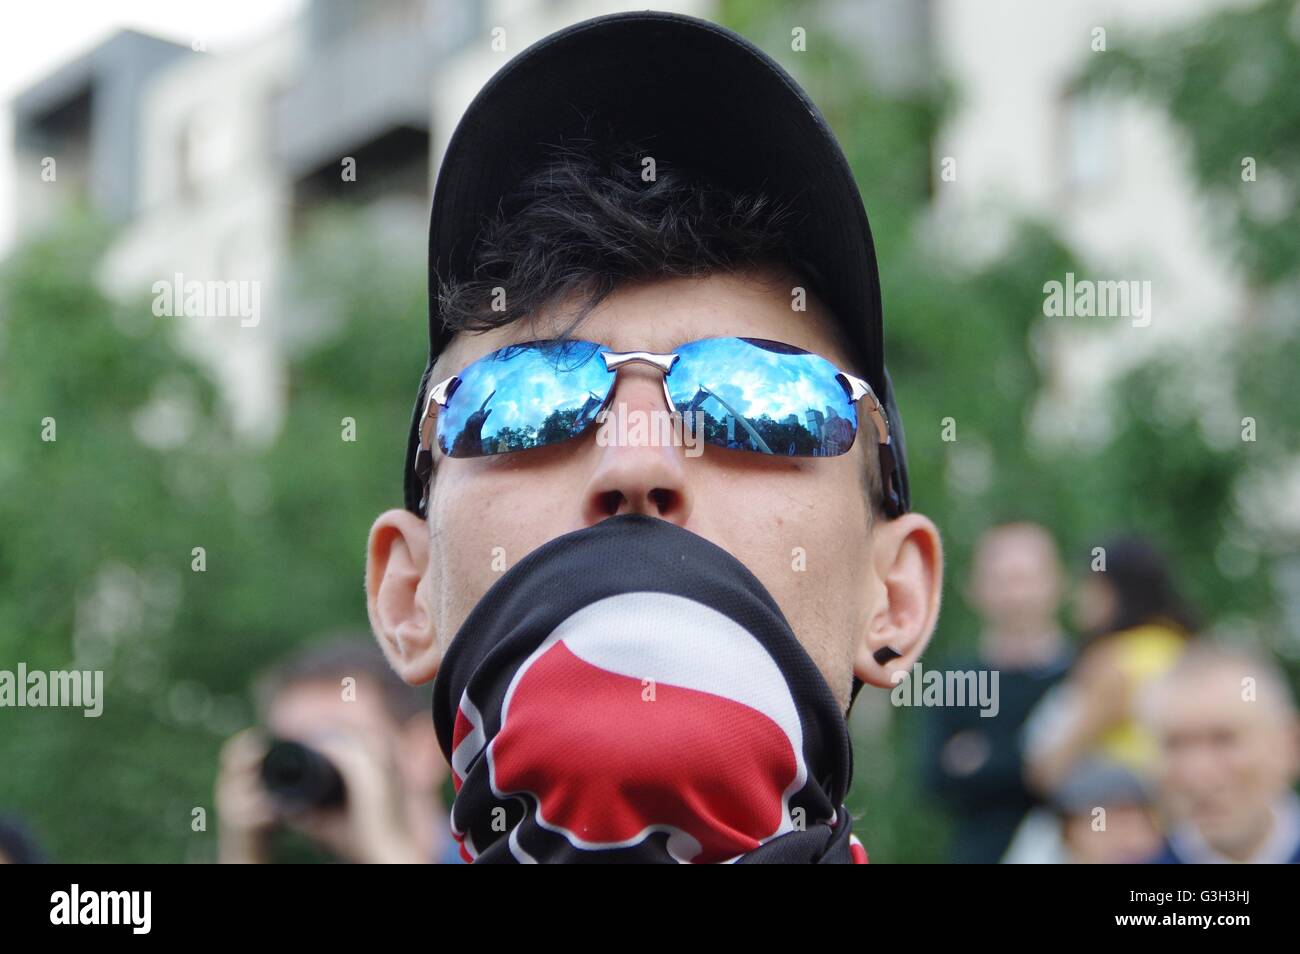 London, UK. 24th June 2016. Pro-refugee activists march through the City of London on the day the UK voted to leave the European Union, a vote they view as anti-immigrant. Credit:  Denis McWilliams/Alamy Live News Stock Photo